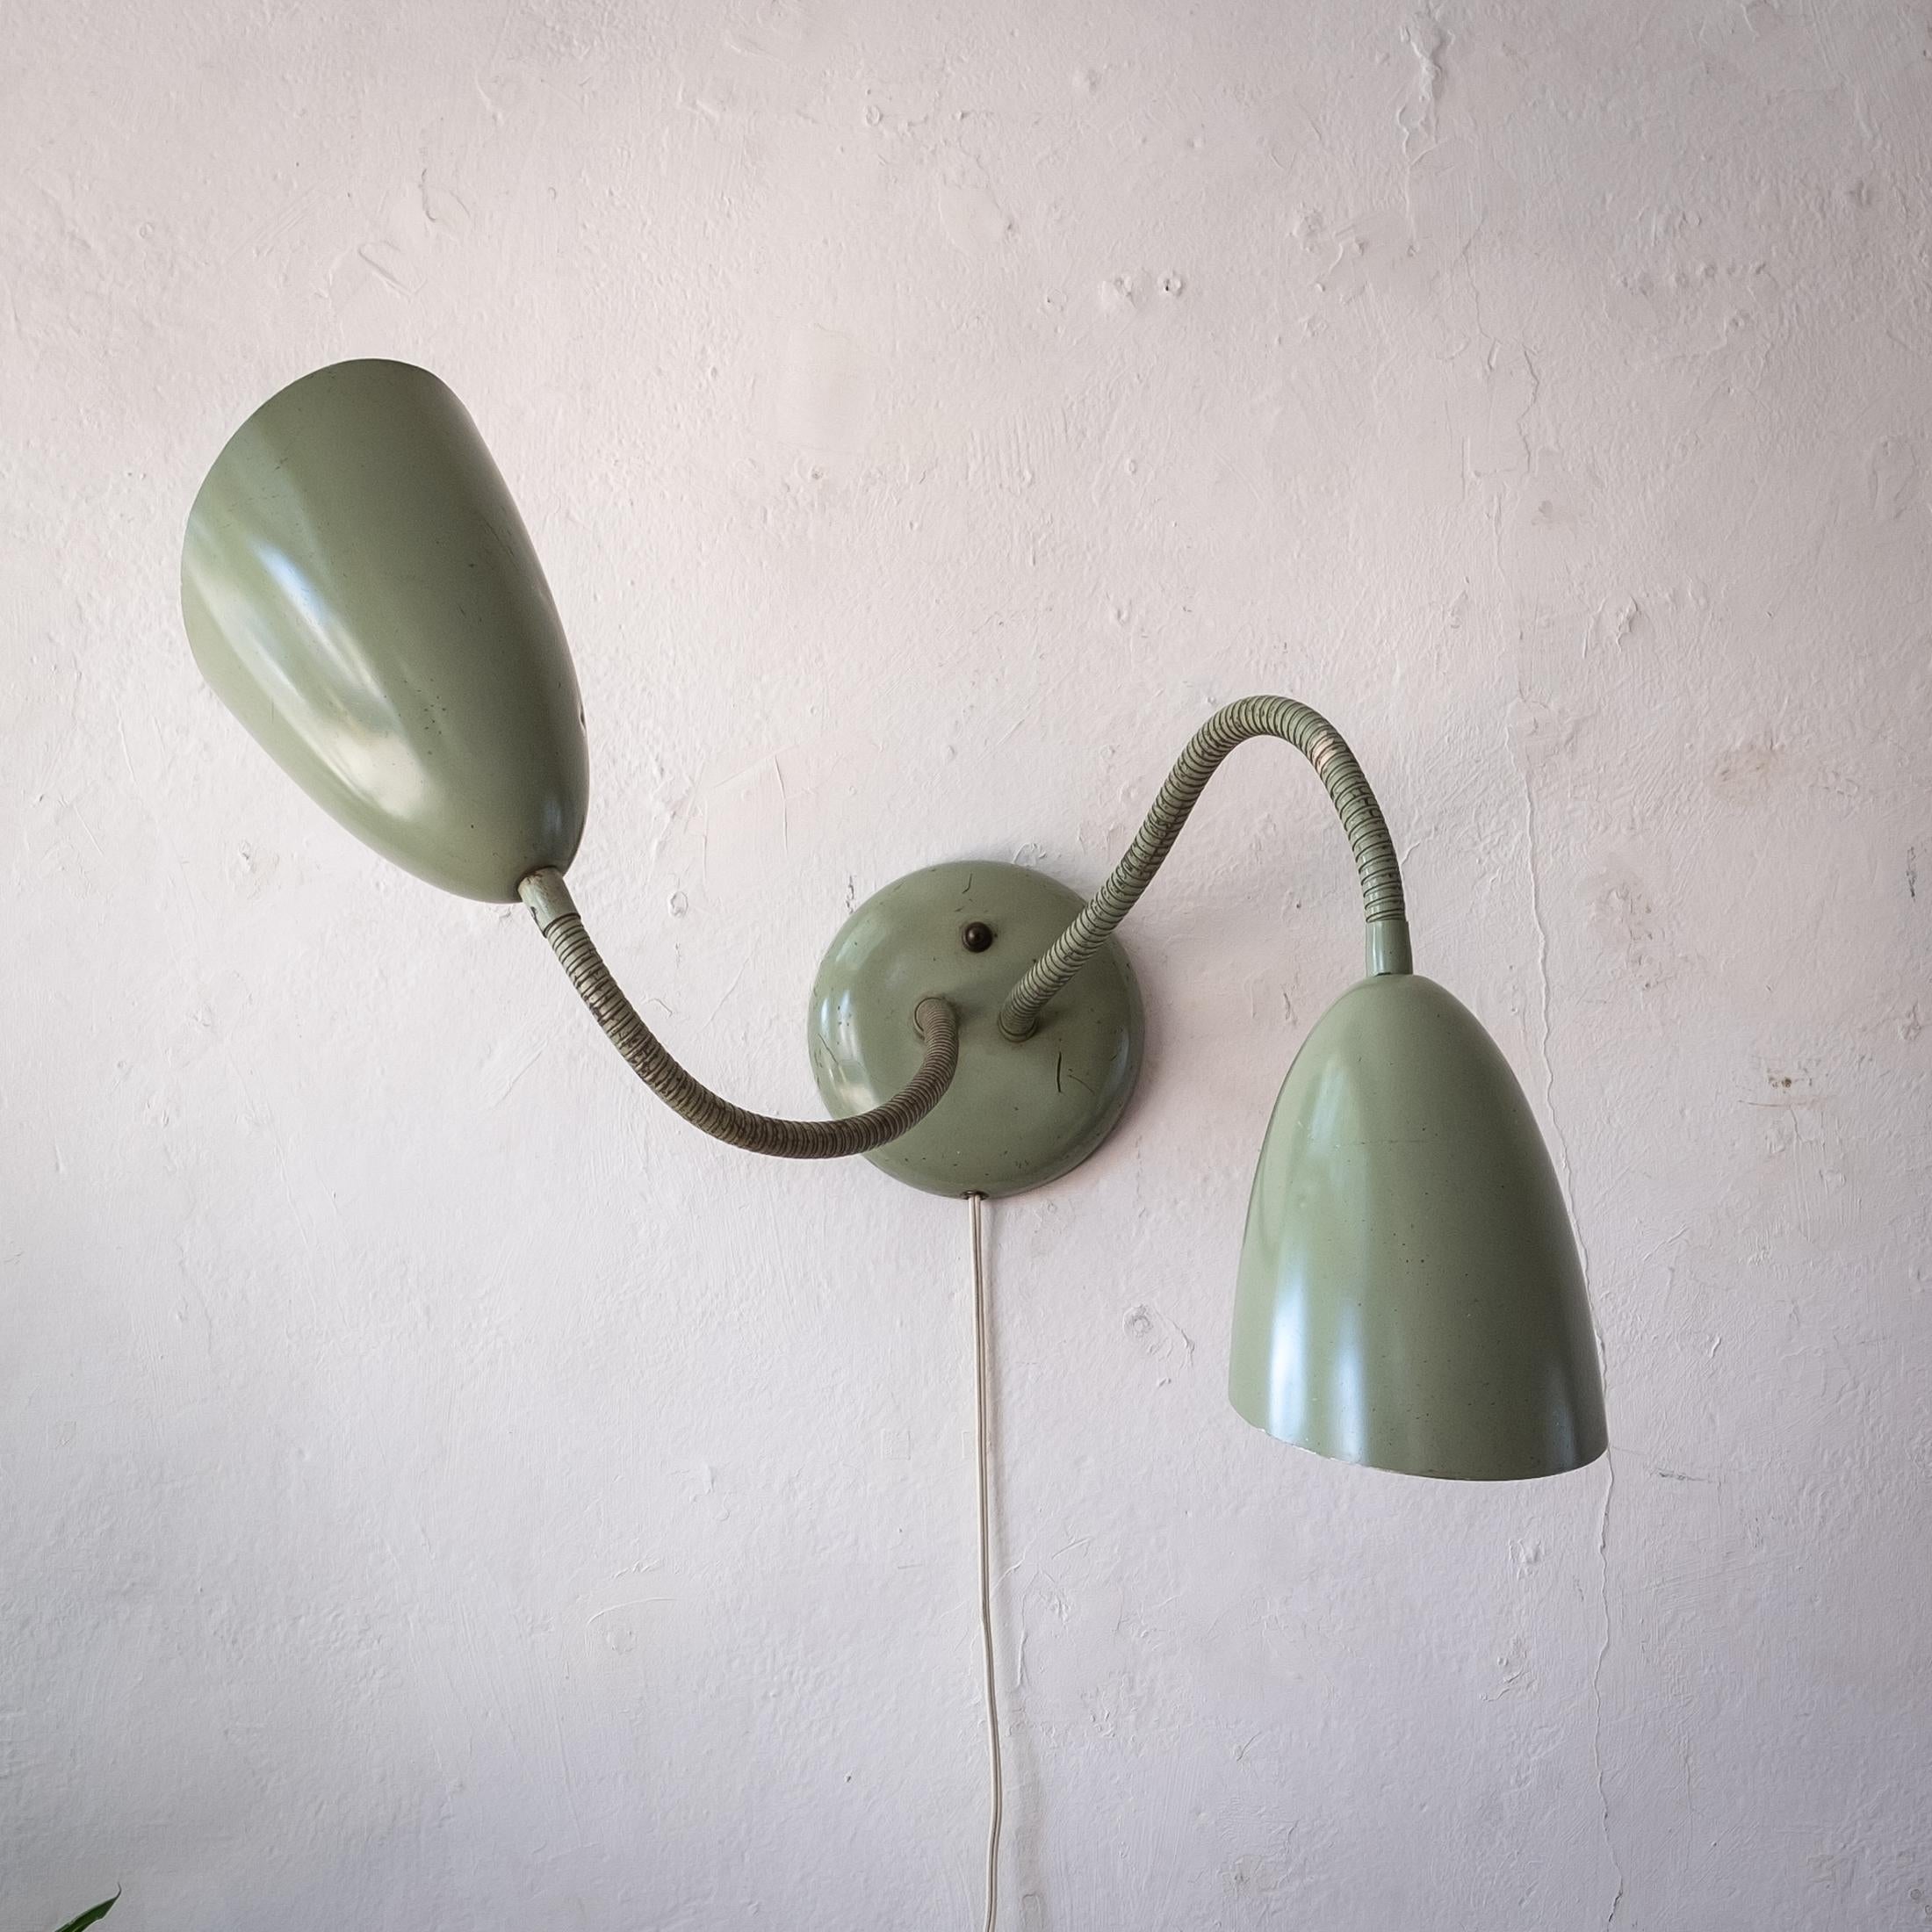 Mid century wall-mount double bullet cone lamp with fully adjustable goosenecks. Can also be used as a desk lamp. Kurt Versen lamps were selected for MoMA Good Design exhibitions and often selected for use in Case Study houses. A classic and